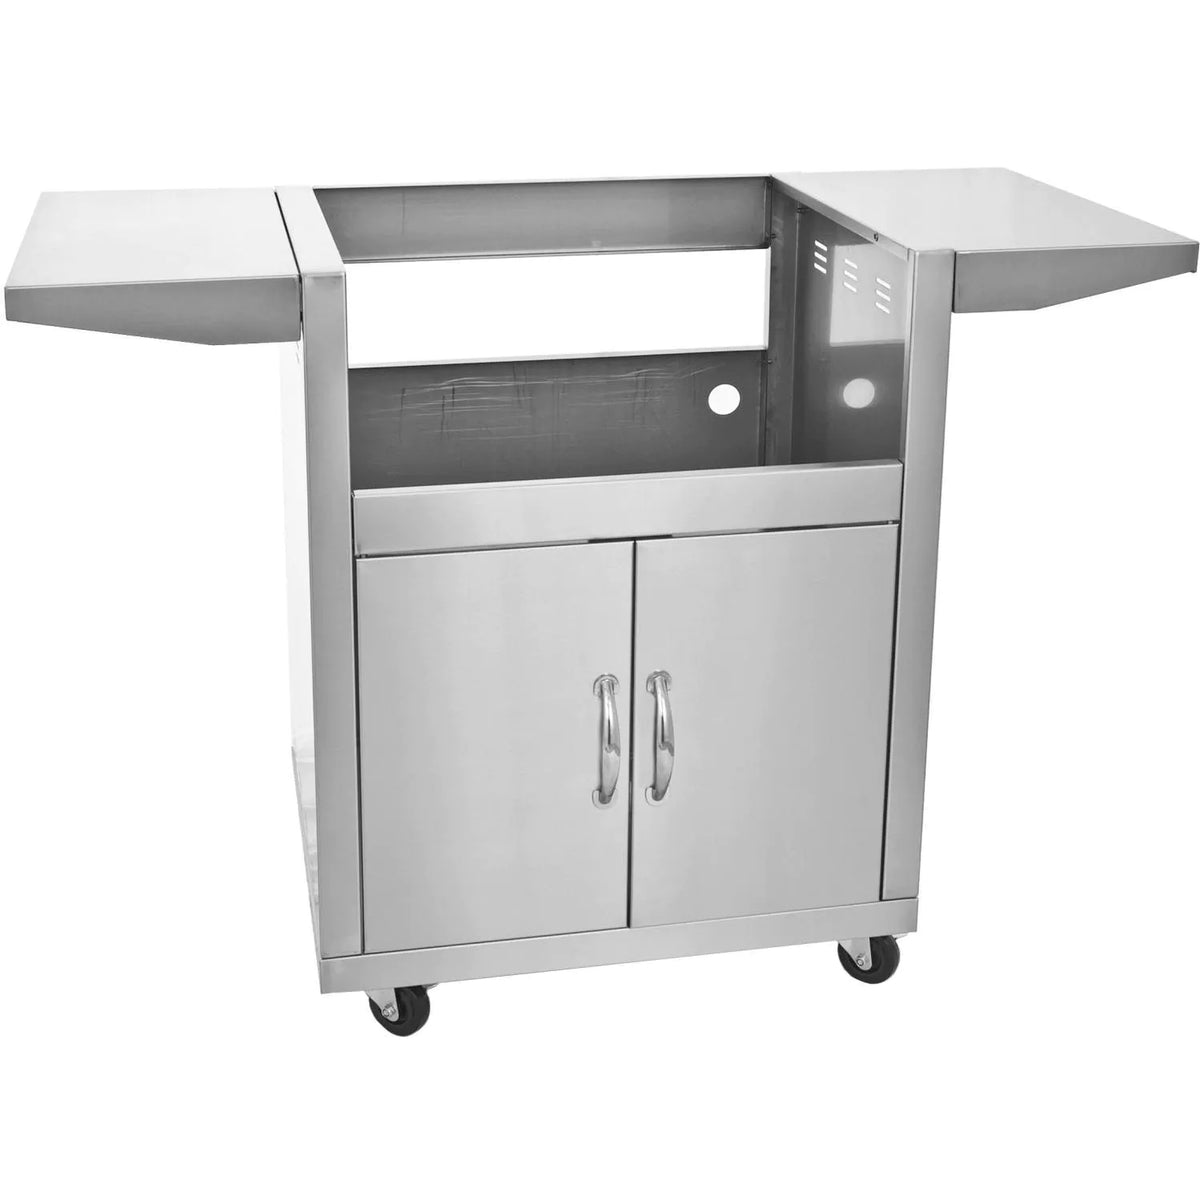 Blaze 3 Burner 25 Inch Grill Cart Side Angle View